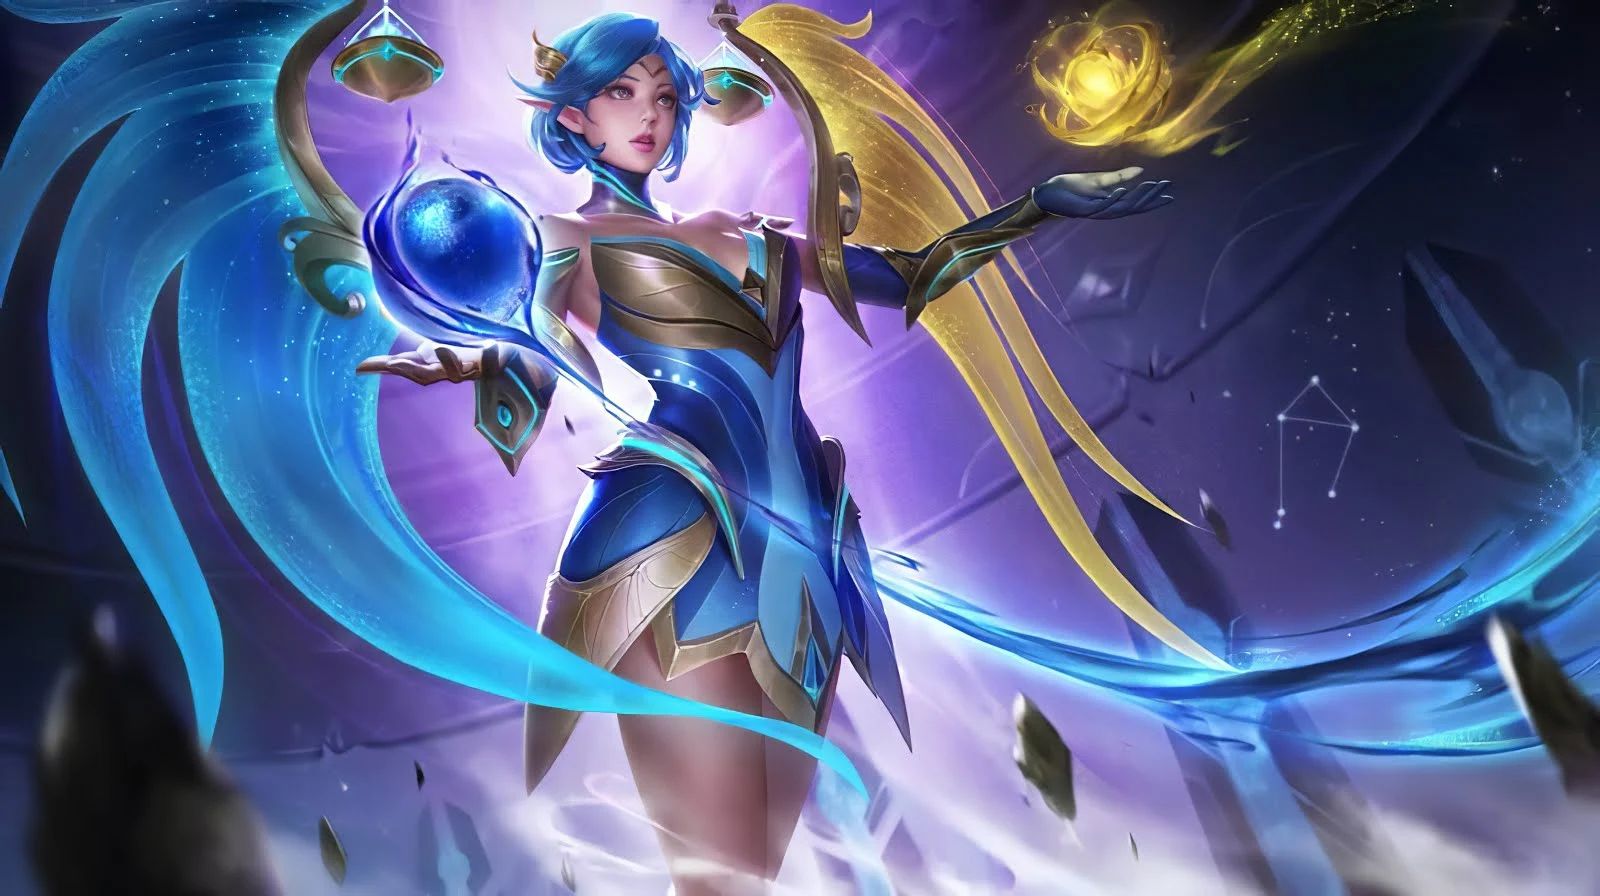 Collection#28 Mobile Legends Wallpapers HD: ALL ZODIAC SKINS WALLPAPERS HD